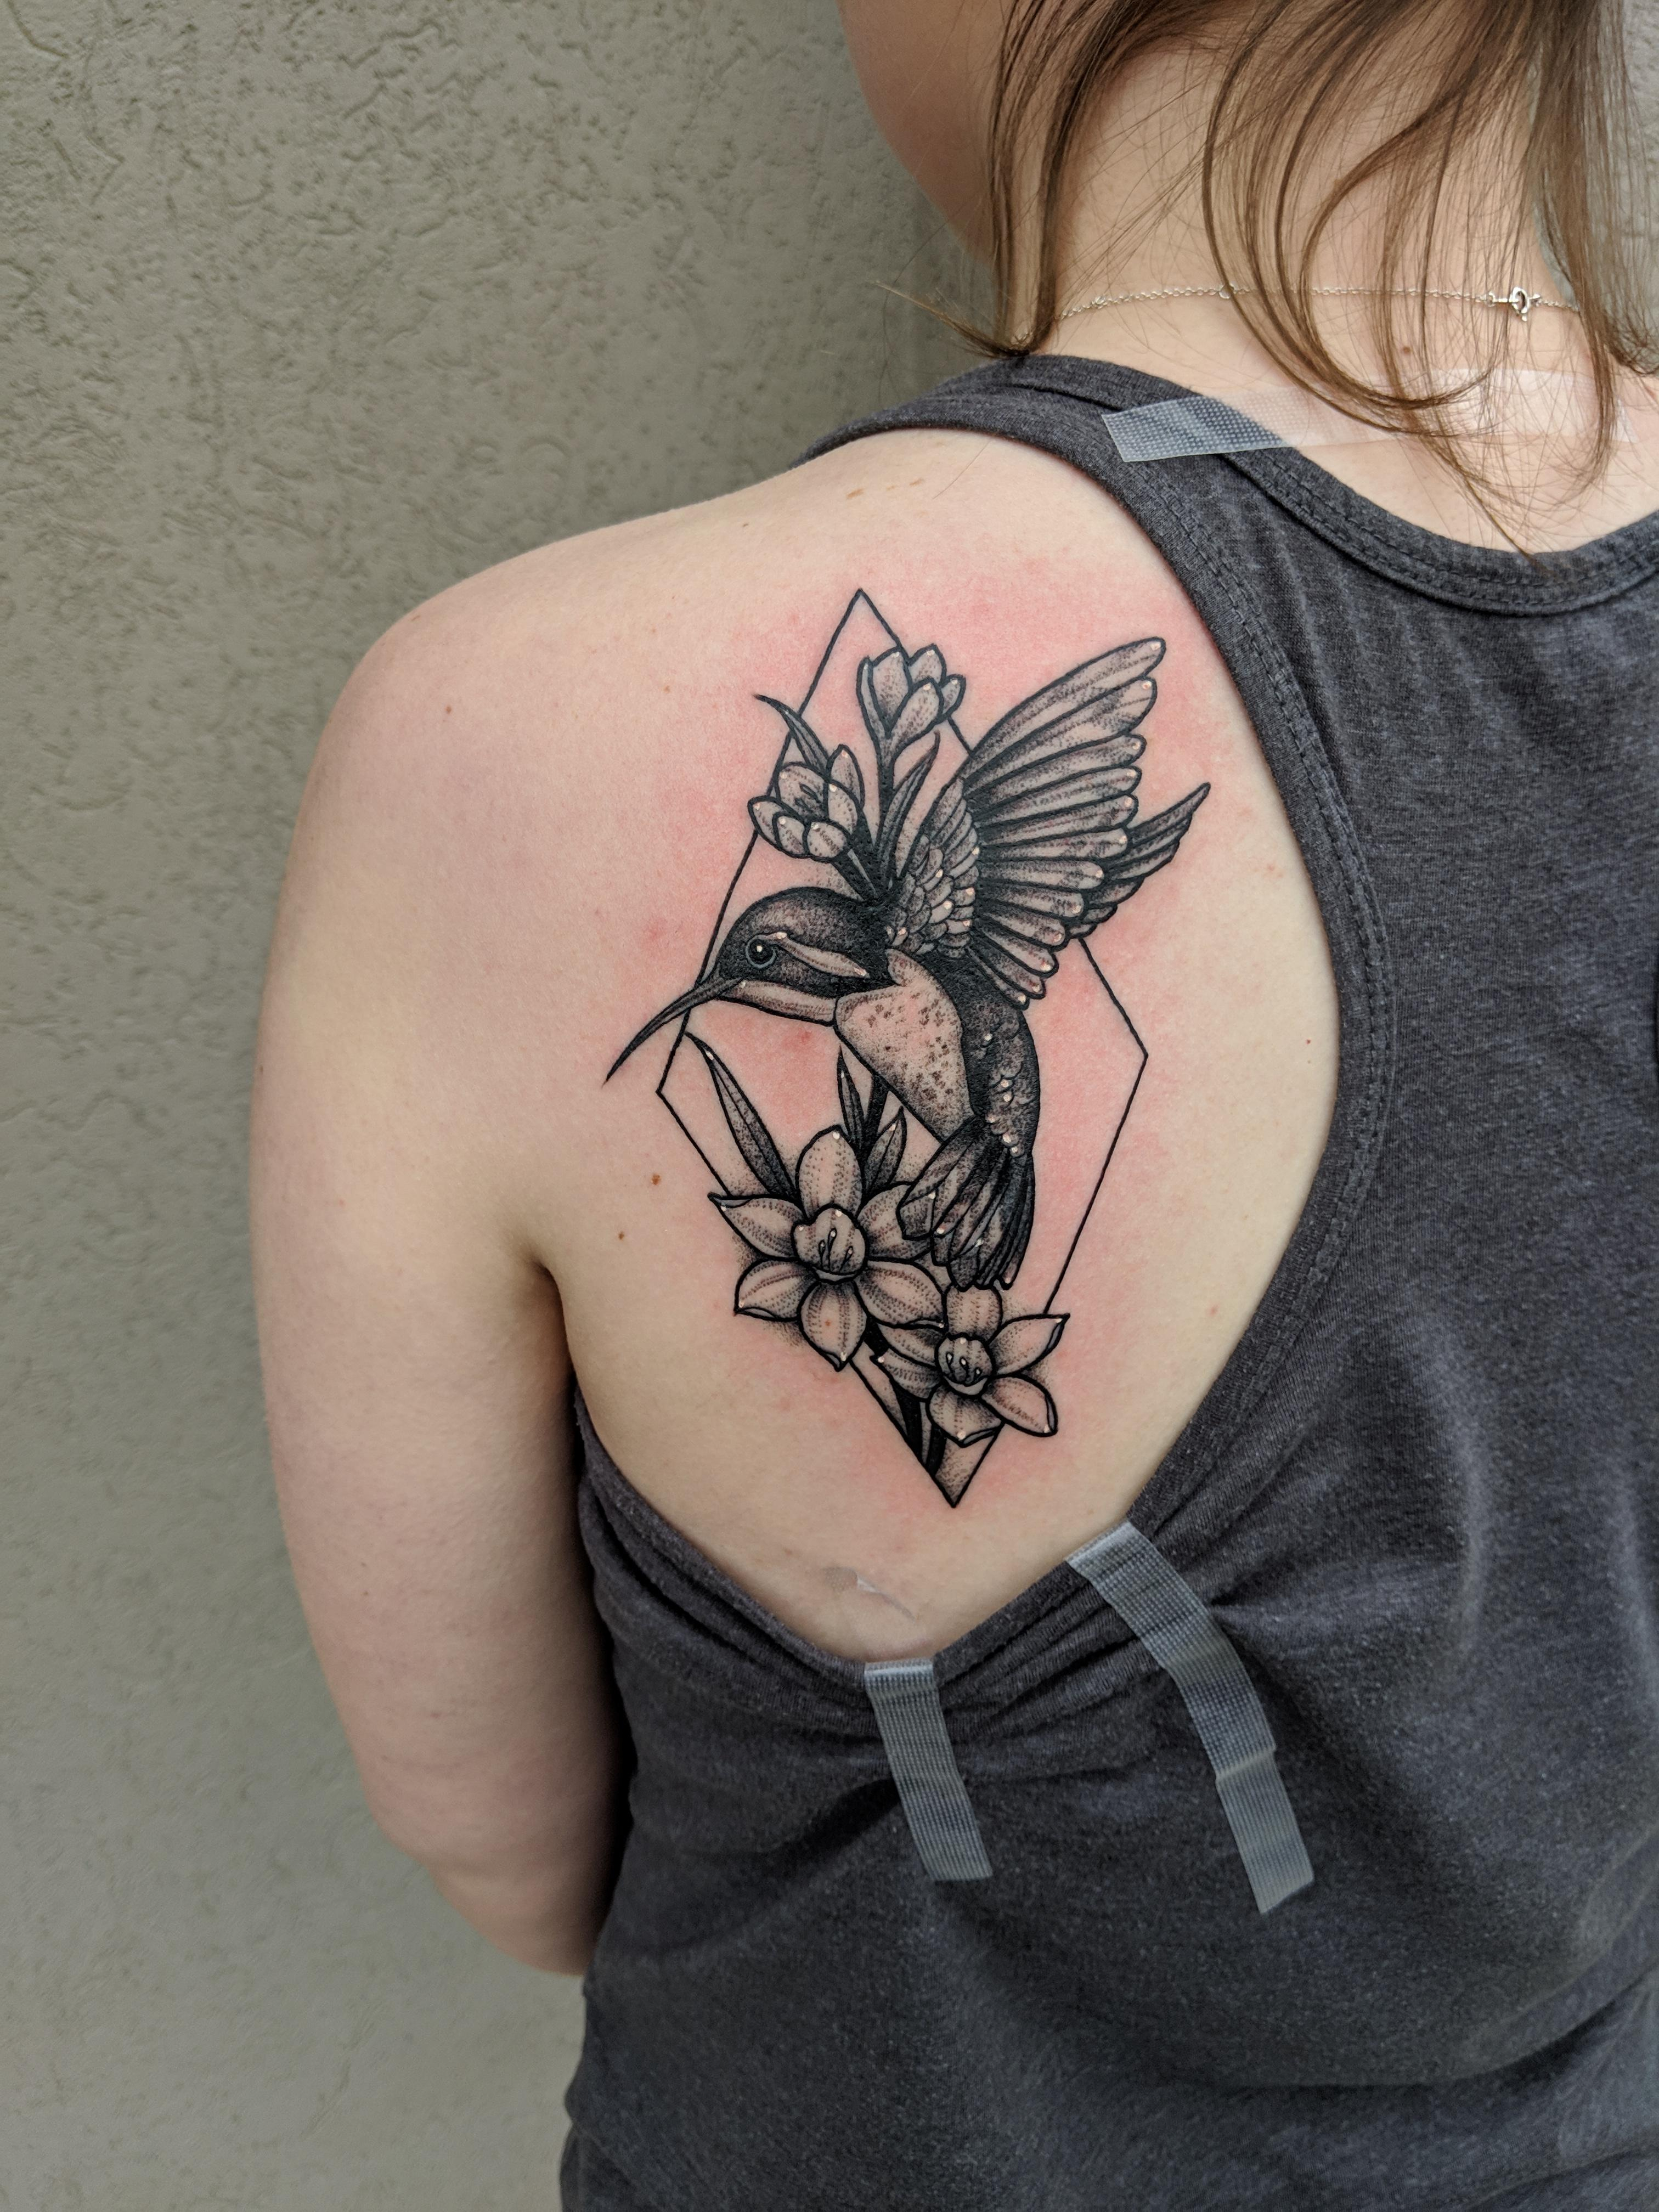 The Hummingbird Tattoo I Got Today Done Emilio At Ink Or Swim In within size 3024 X 4032